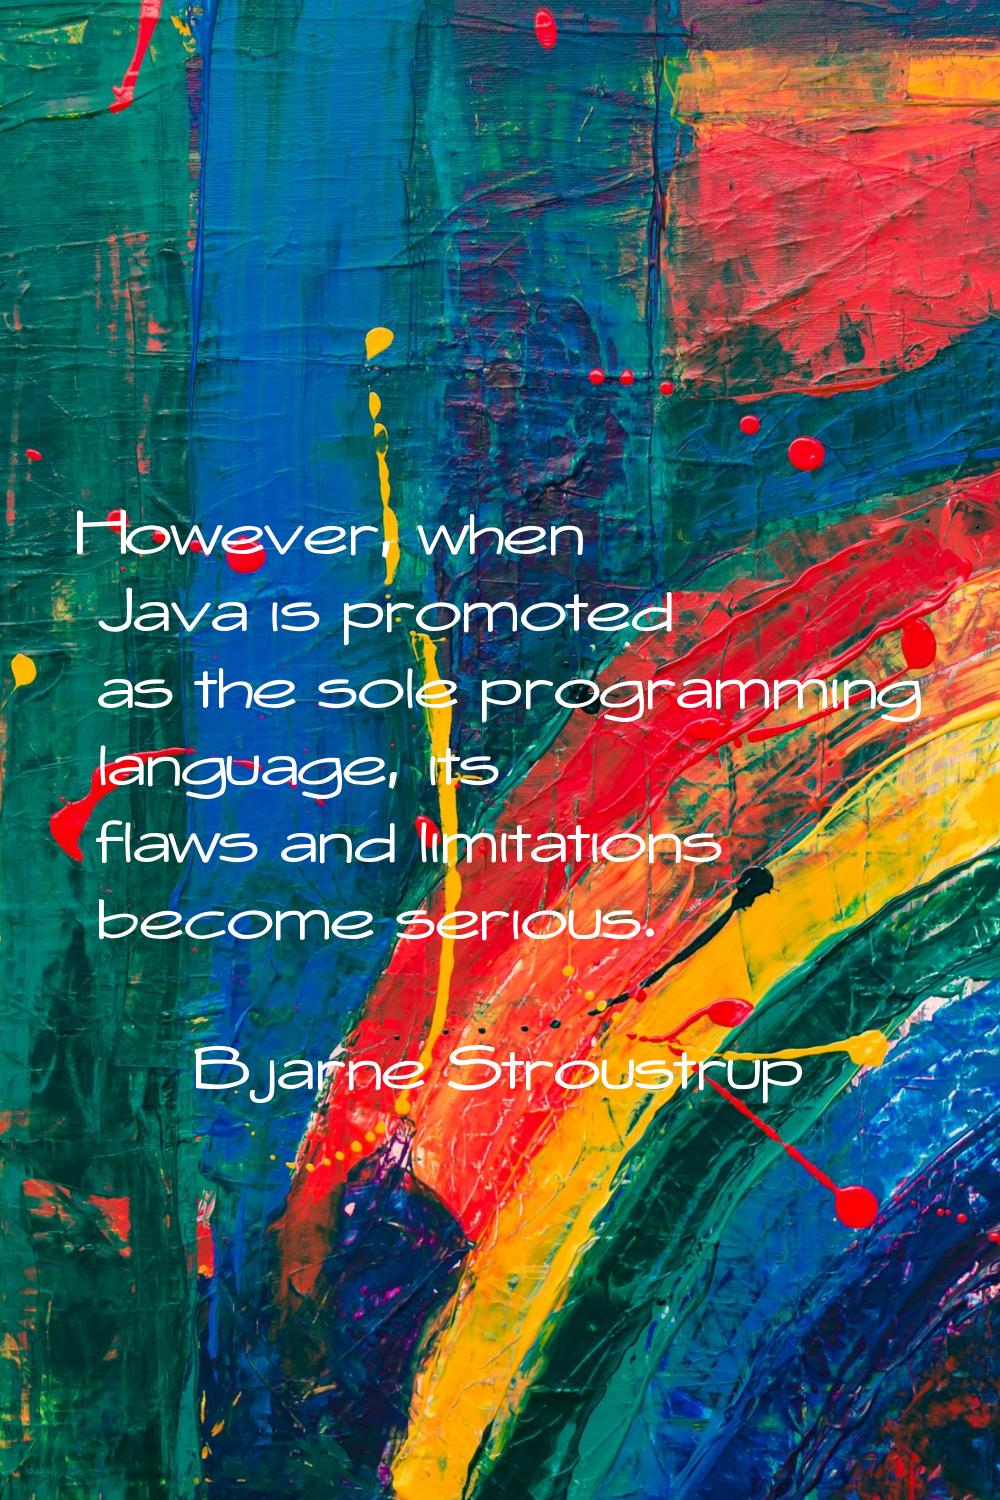 However, when Java is promoted as the sole programming language, its flaws and limitations become s